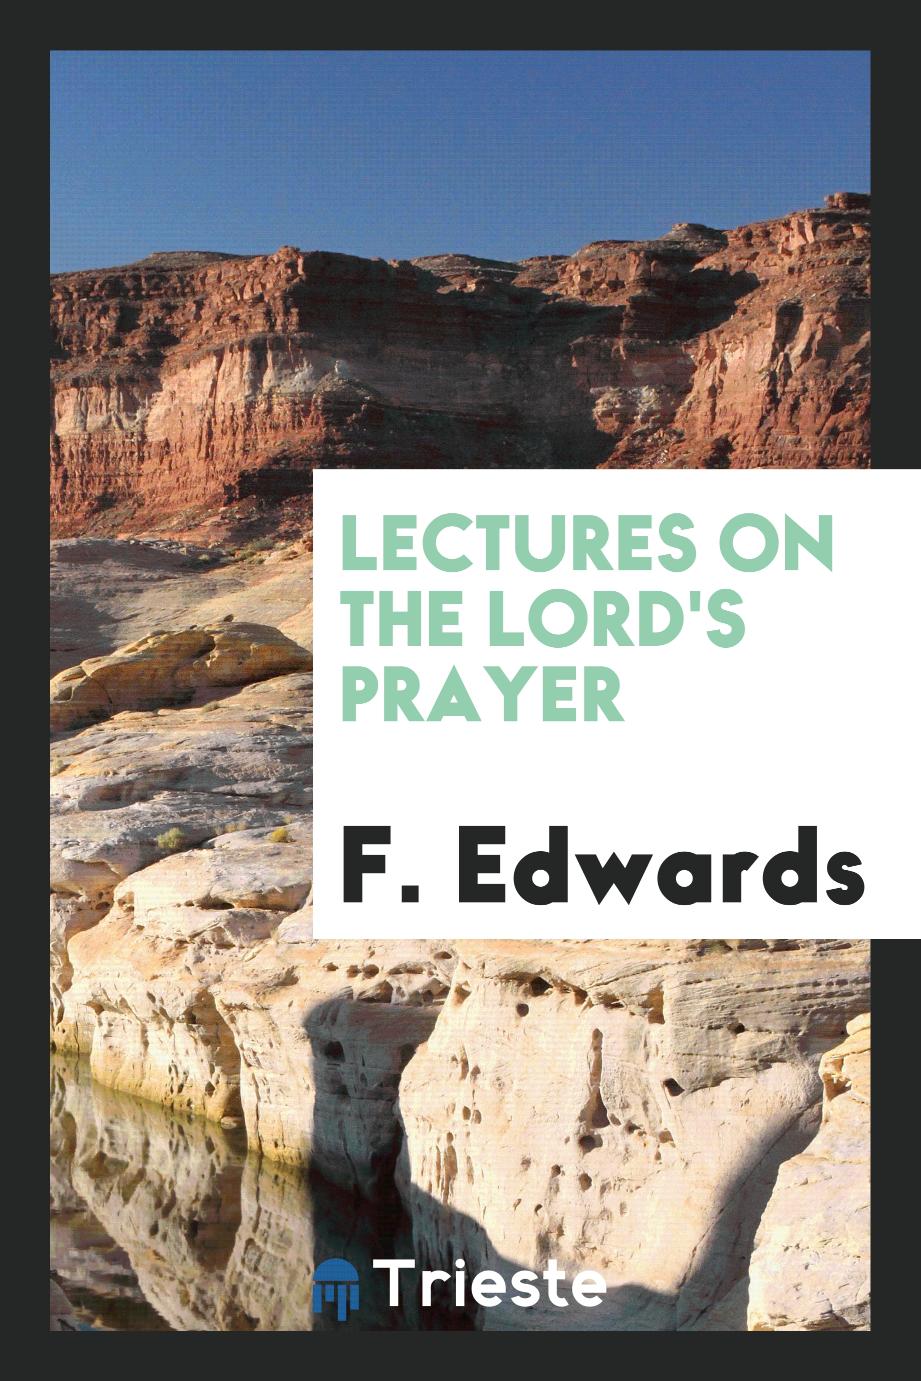 Lectures on the Lord's prayer